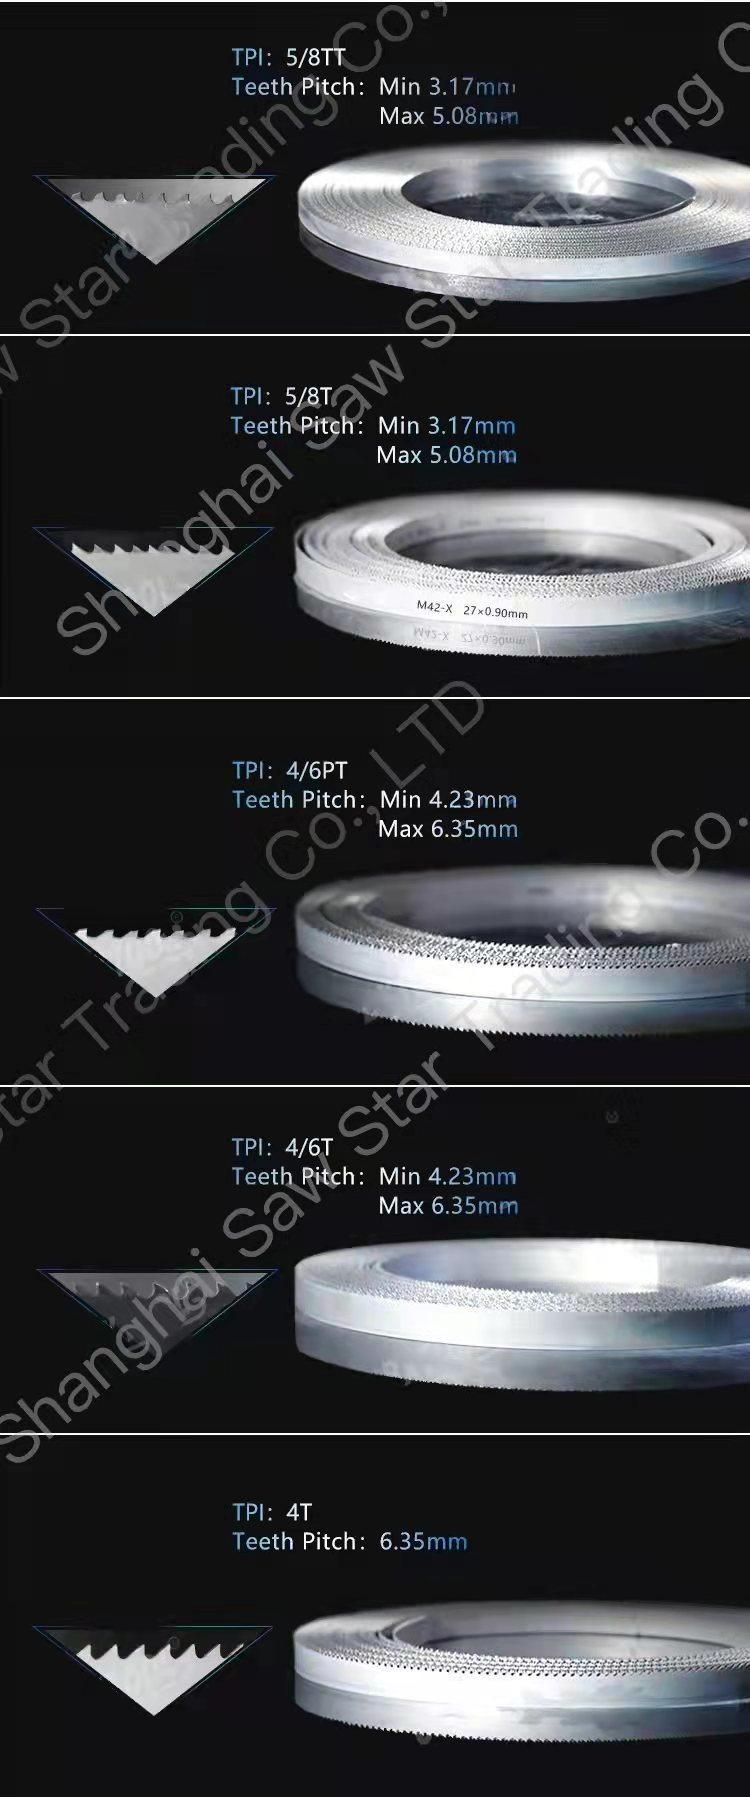 34 * 1.1 * 4115 Band Saw Blade Has The Best Cutting Effect and Complete Tooth Types of Bimetal Saw Blade